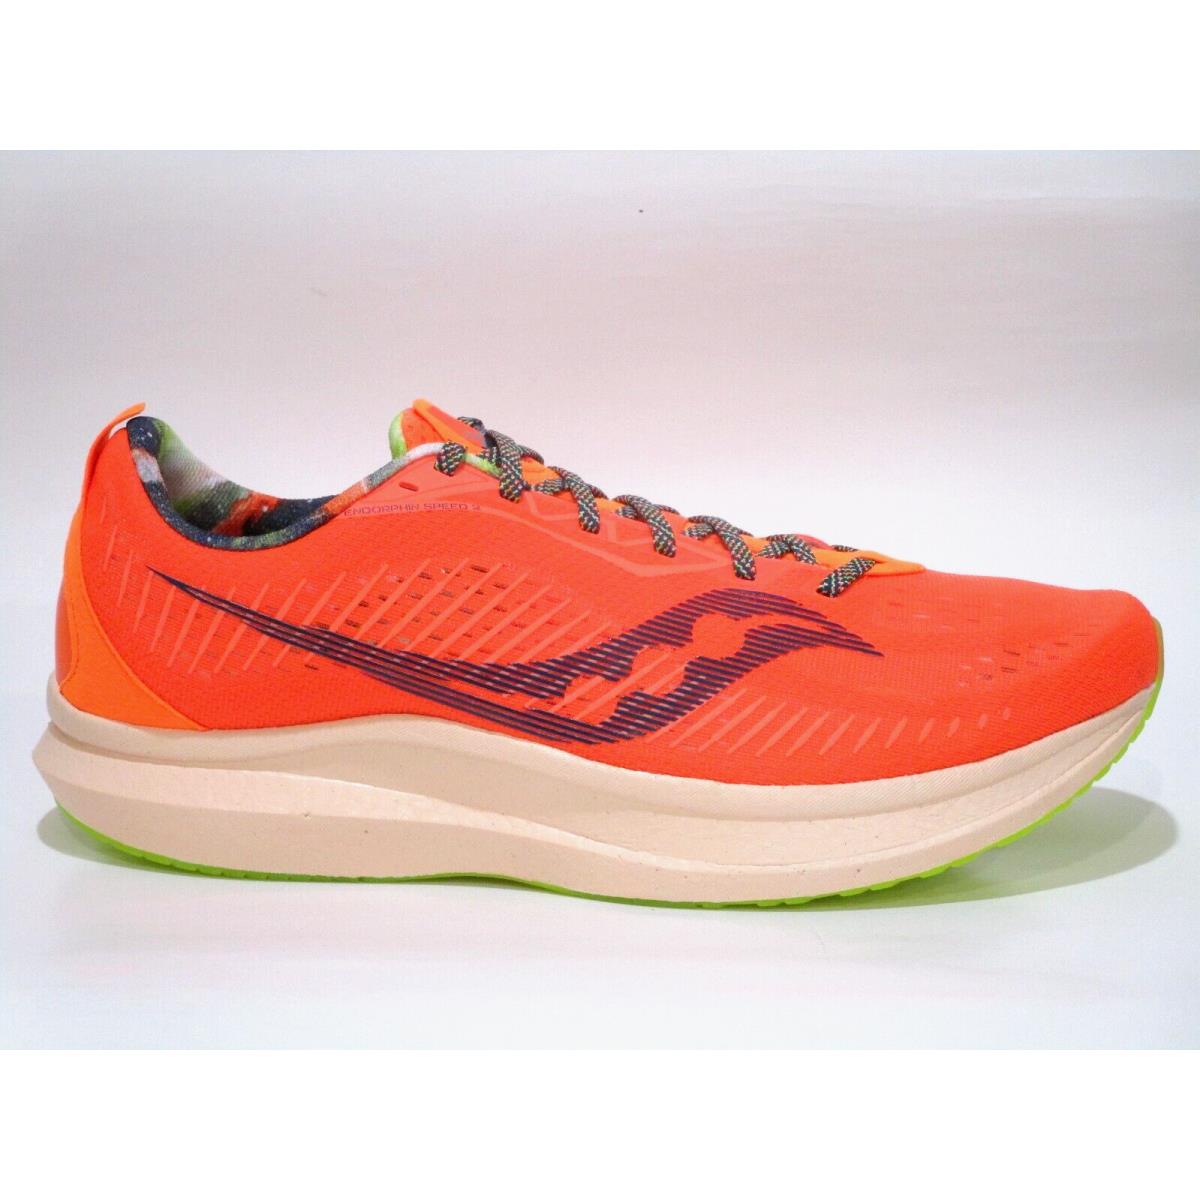 Saucony Men`s S20688-45 Endorphin Speed 2 Running Shoes Campfire Story 15 M US